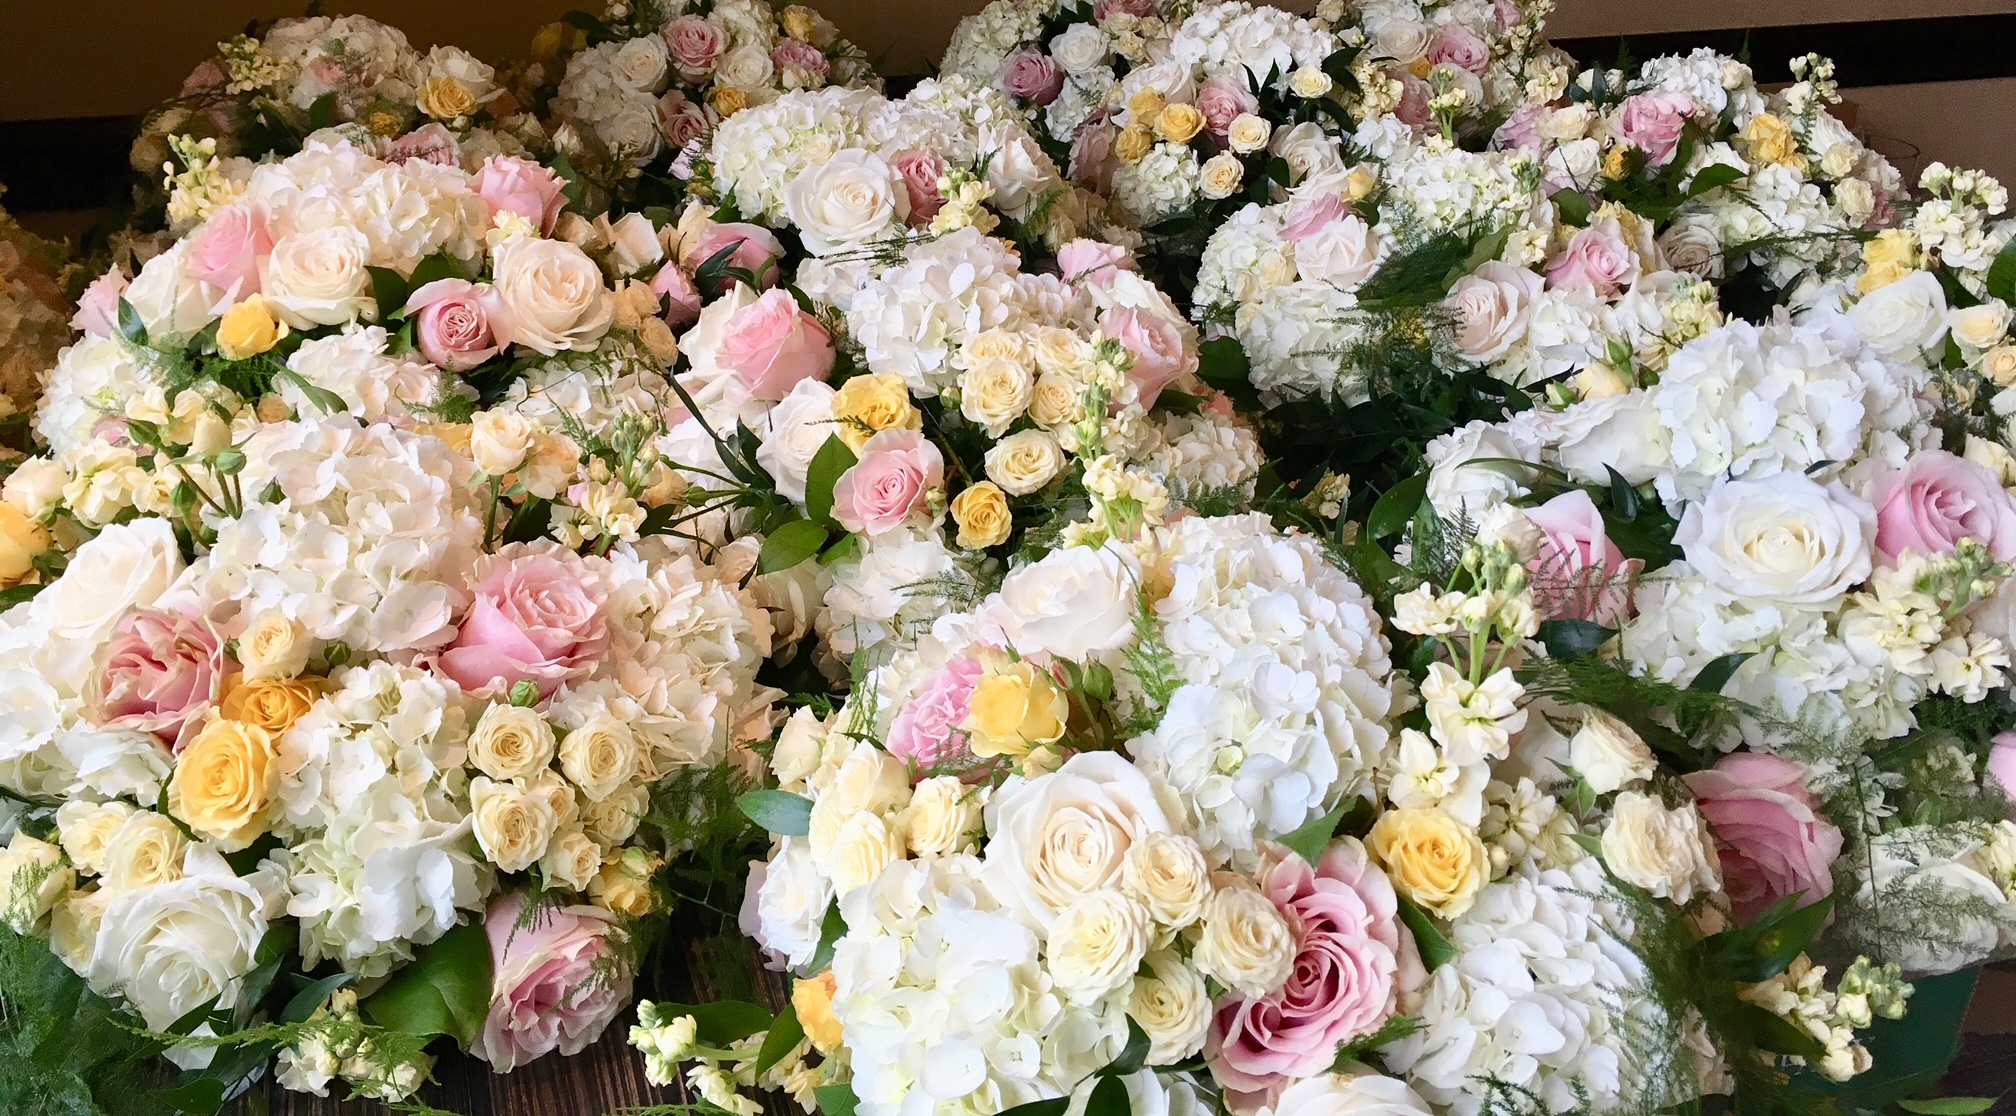 Butera The Florist Centerpieces ready for delivery to a Grand Wedding Reception